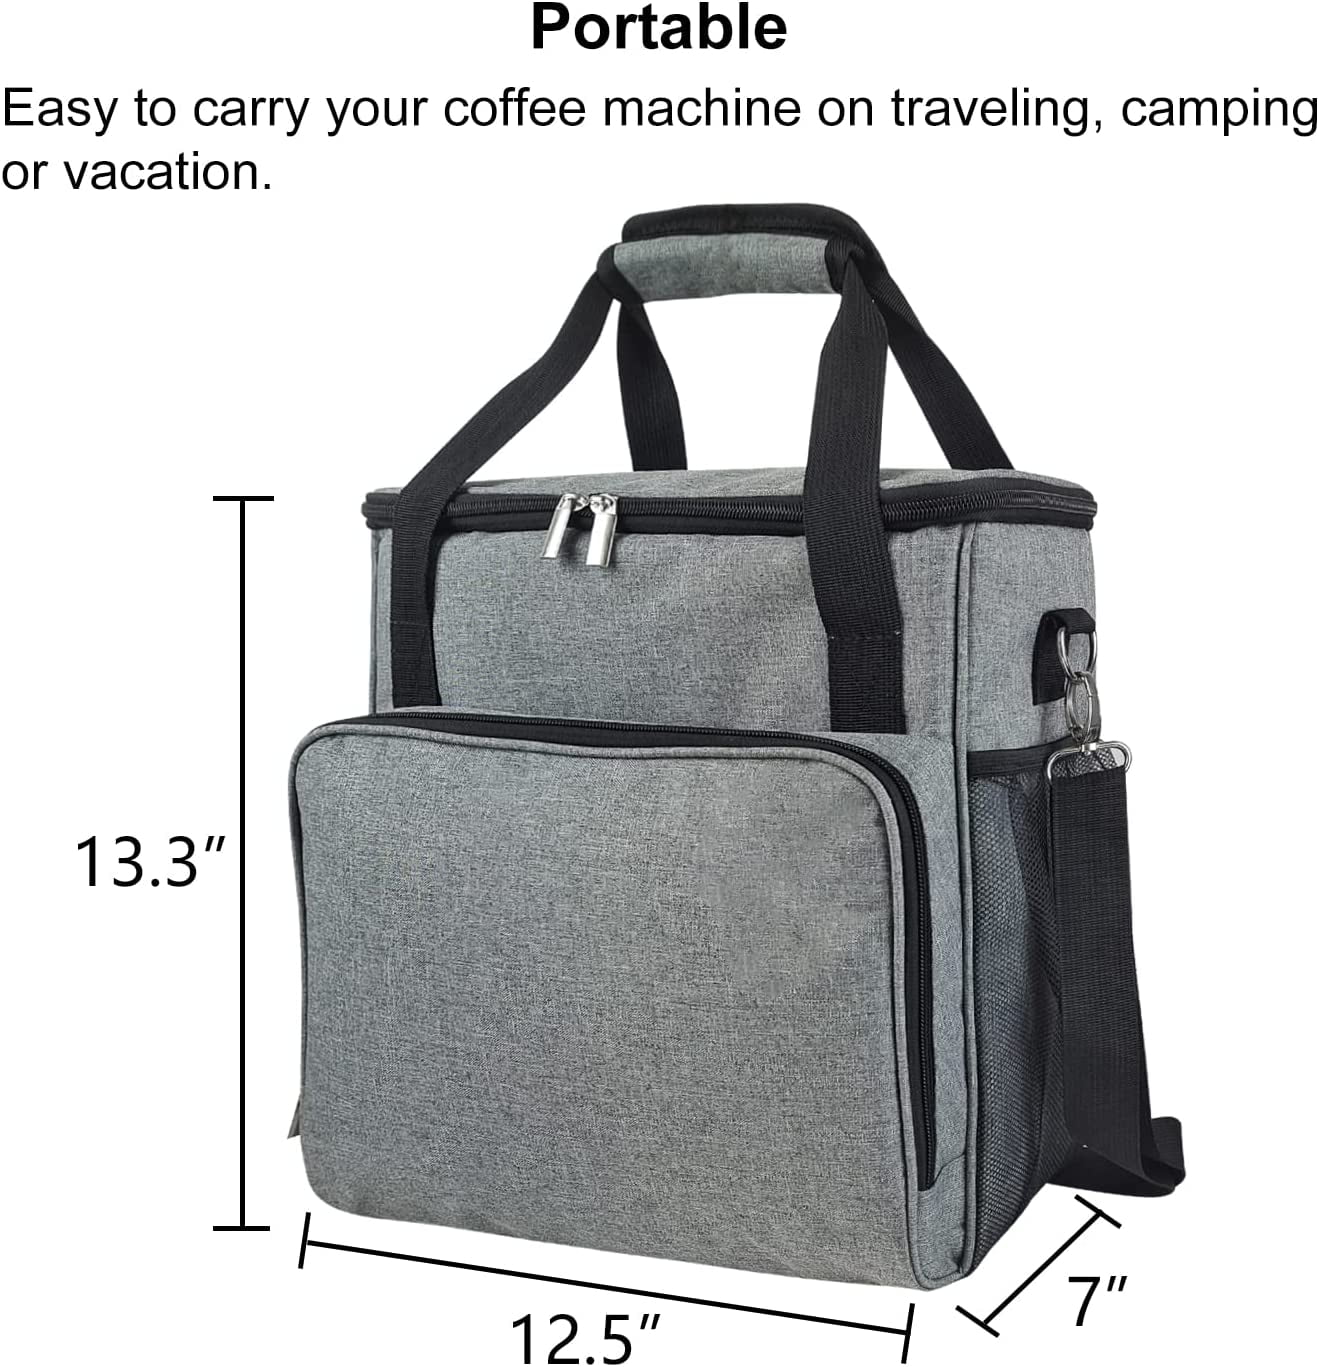 VOSDANS Travel Coffee Maker Carrying Bag, Tote Bag for Keurig K-Mini Plus  Coffee Maker or Keurig K-Mini Coffee Maker or K-cup Pod or Keurig Travel